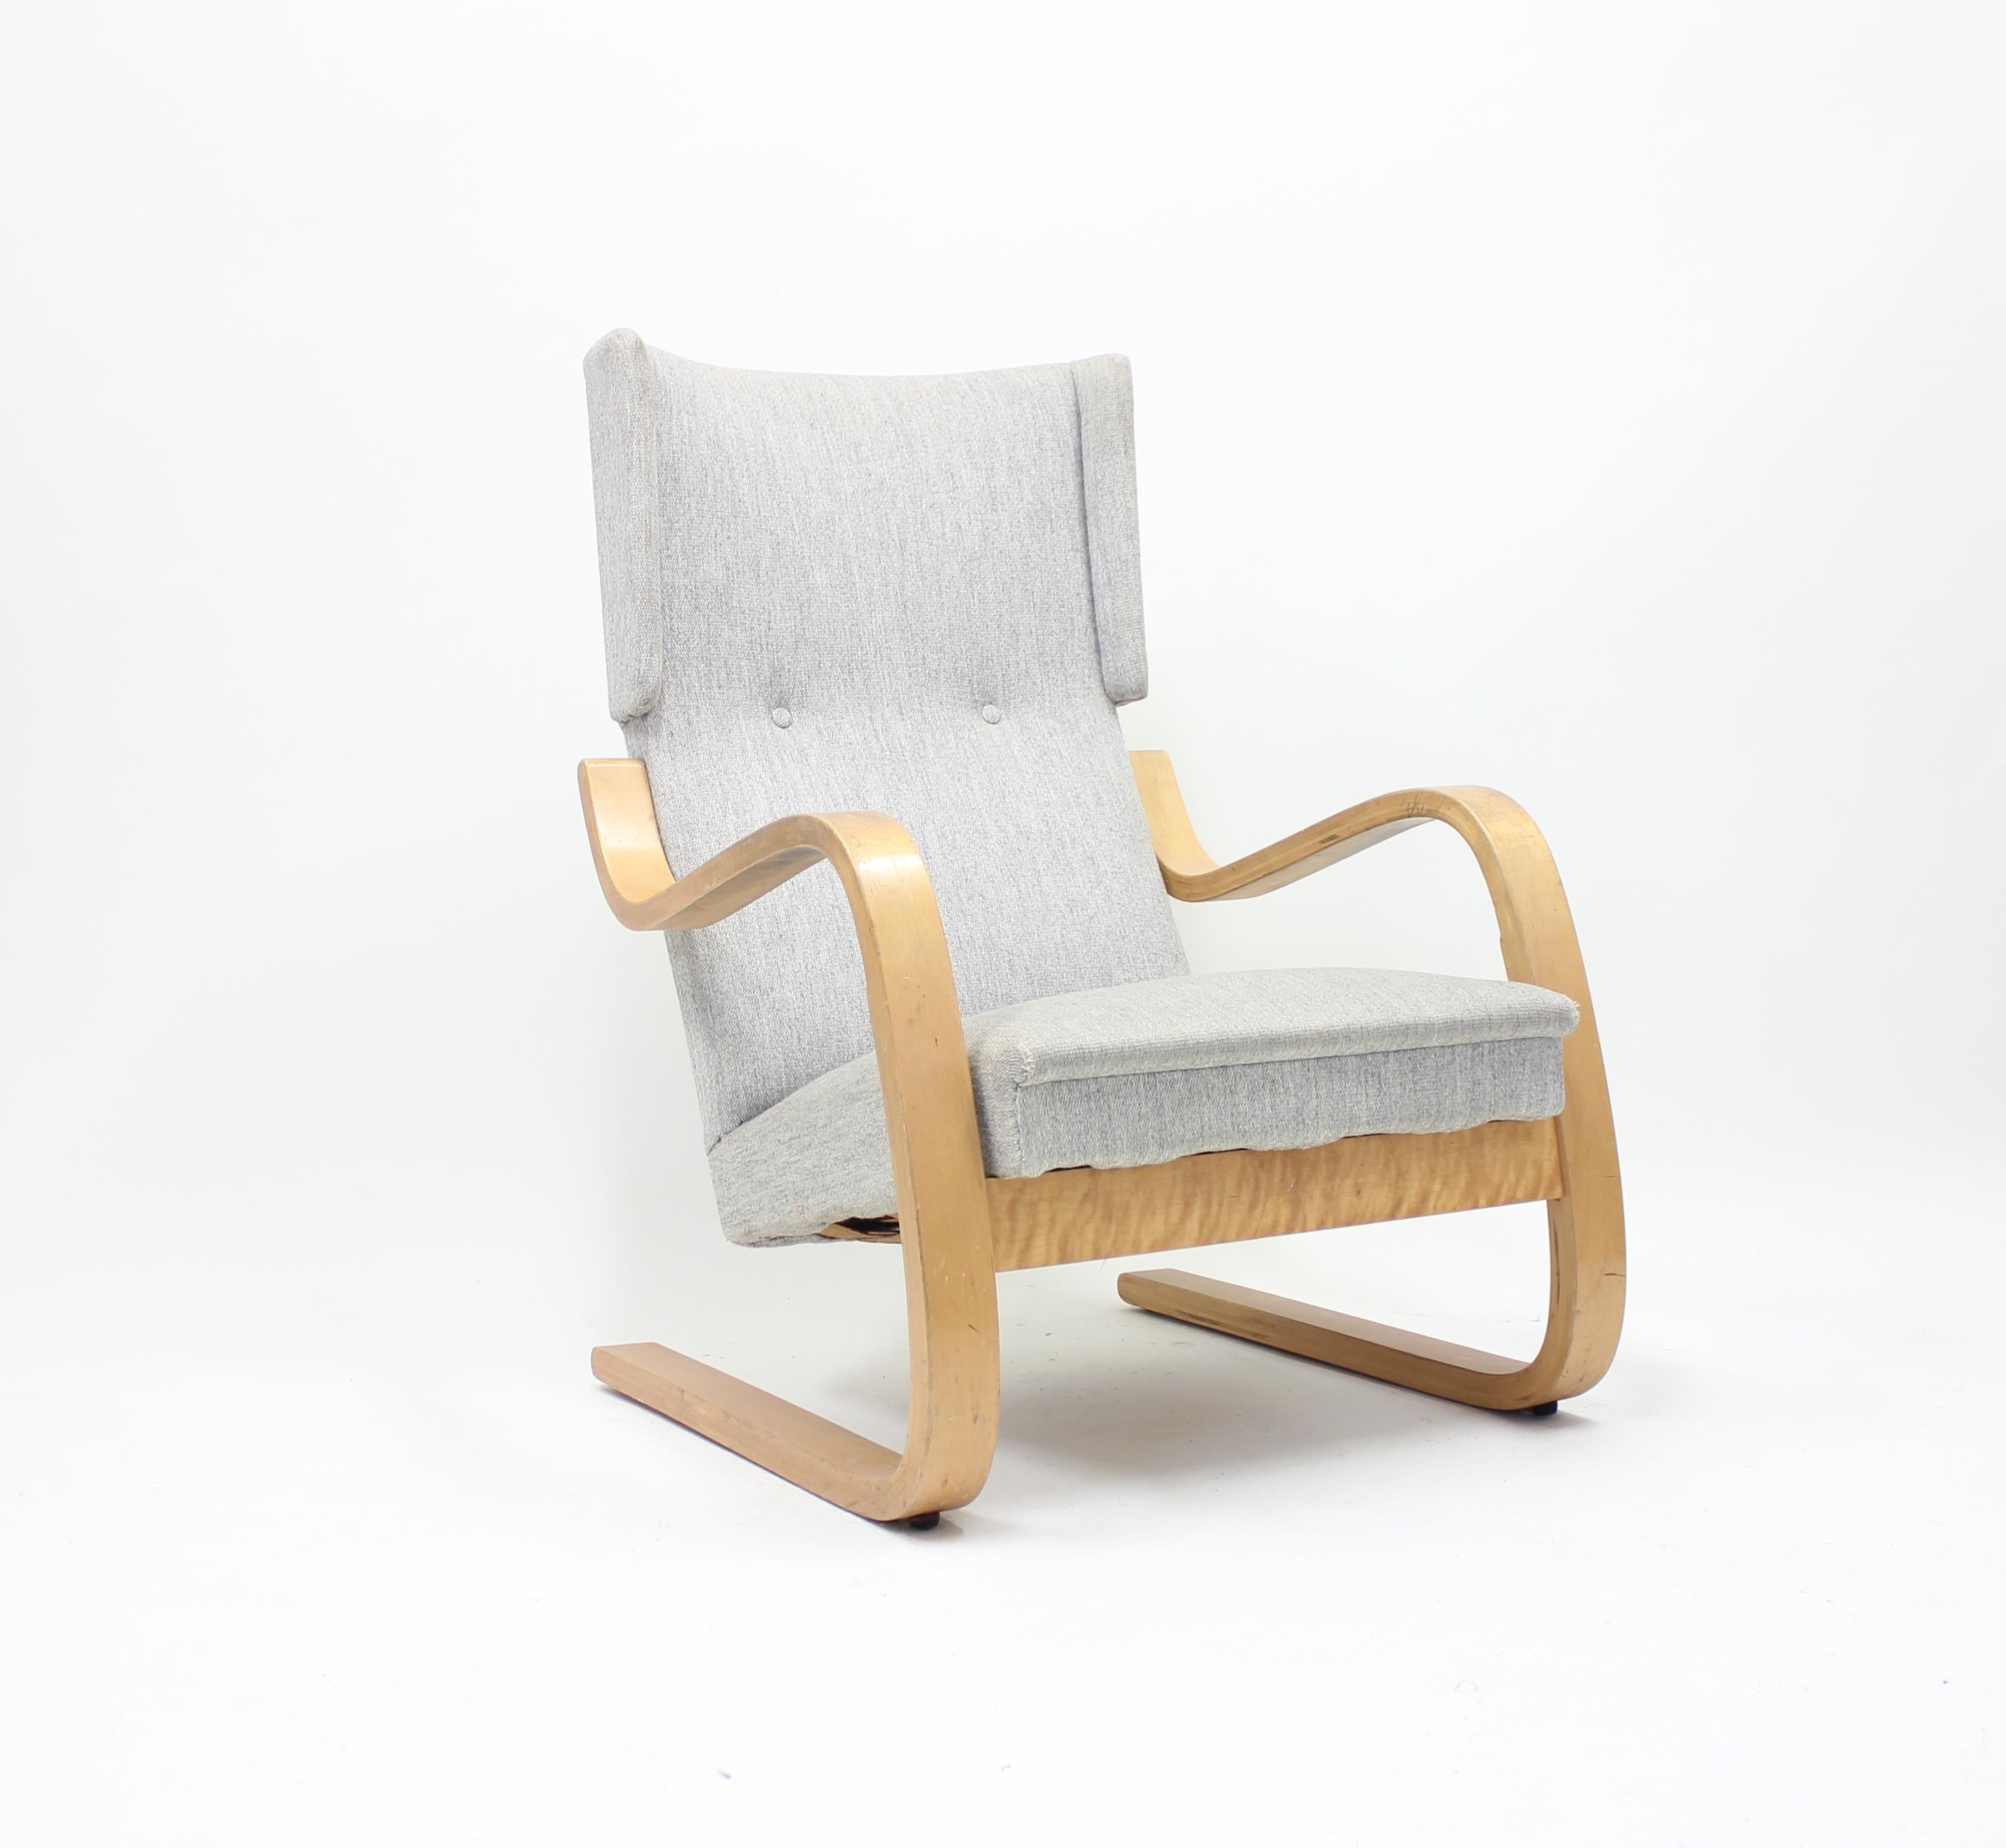 Early production, model 36/401 easy chair, by Alvar Aalto for Artek, Hedemora, circa 1950. Frame of steam bent birch and later upholstery in a grey wool fabric commissioned by the original owner. It has a very special provenance. This single owner